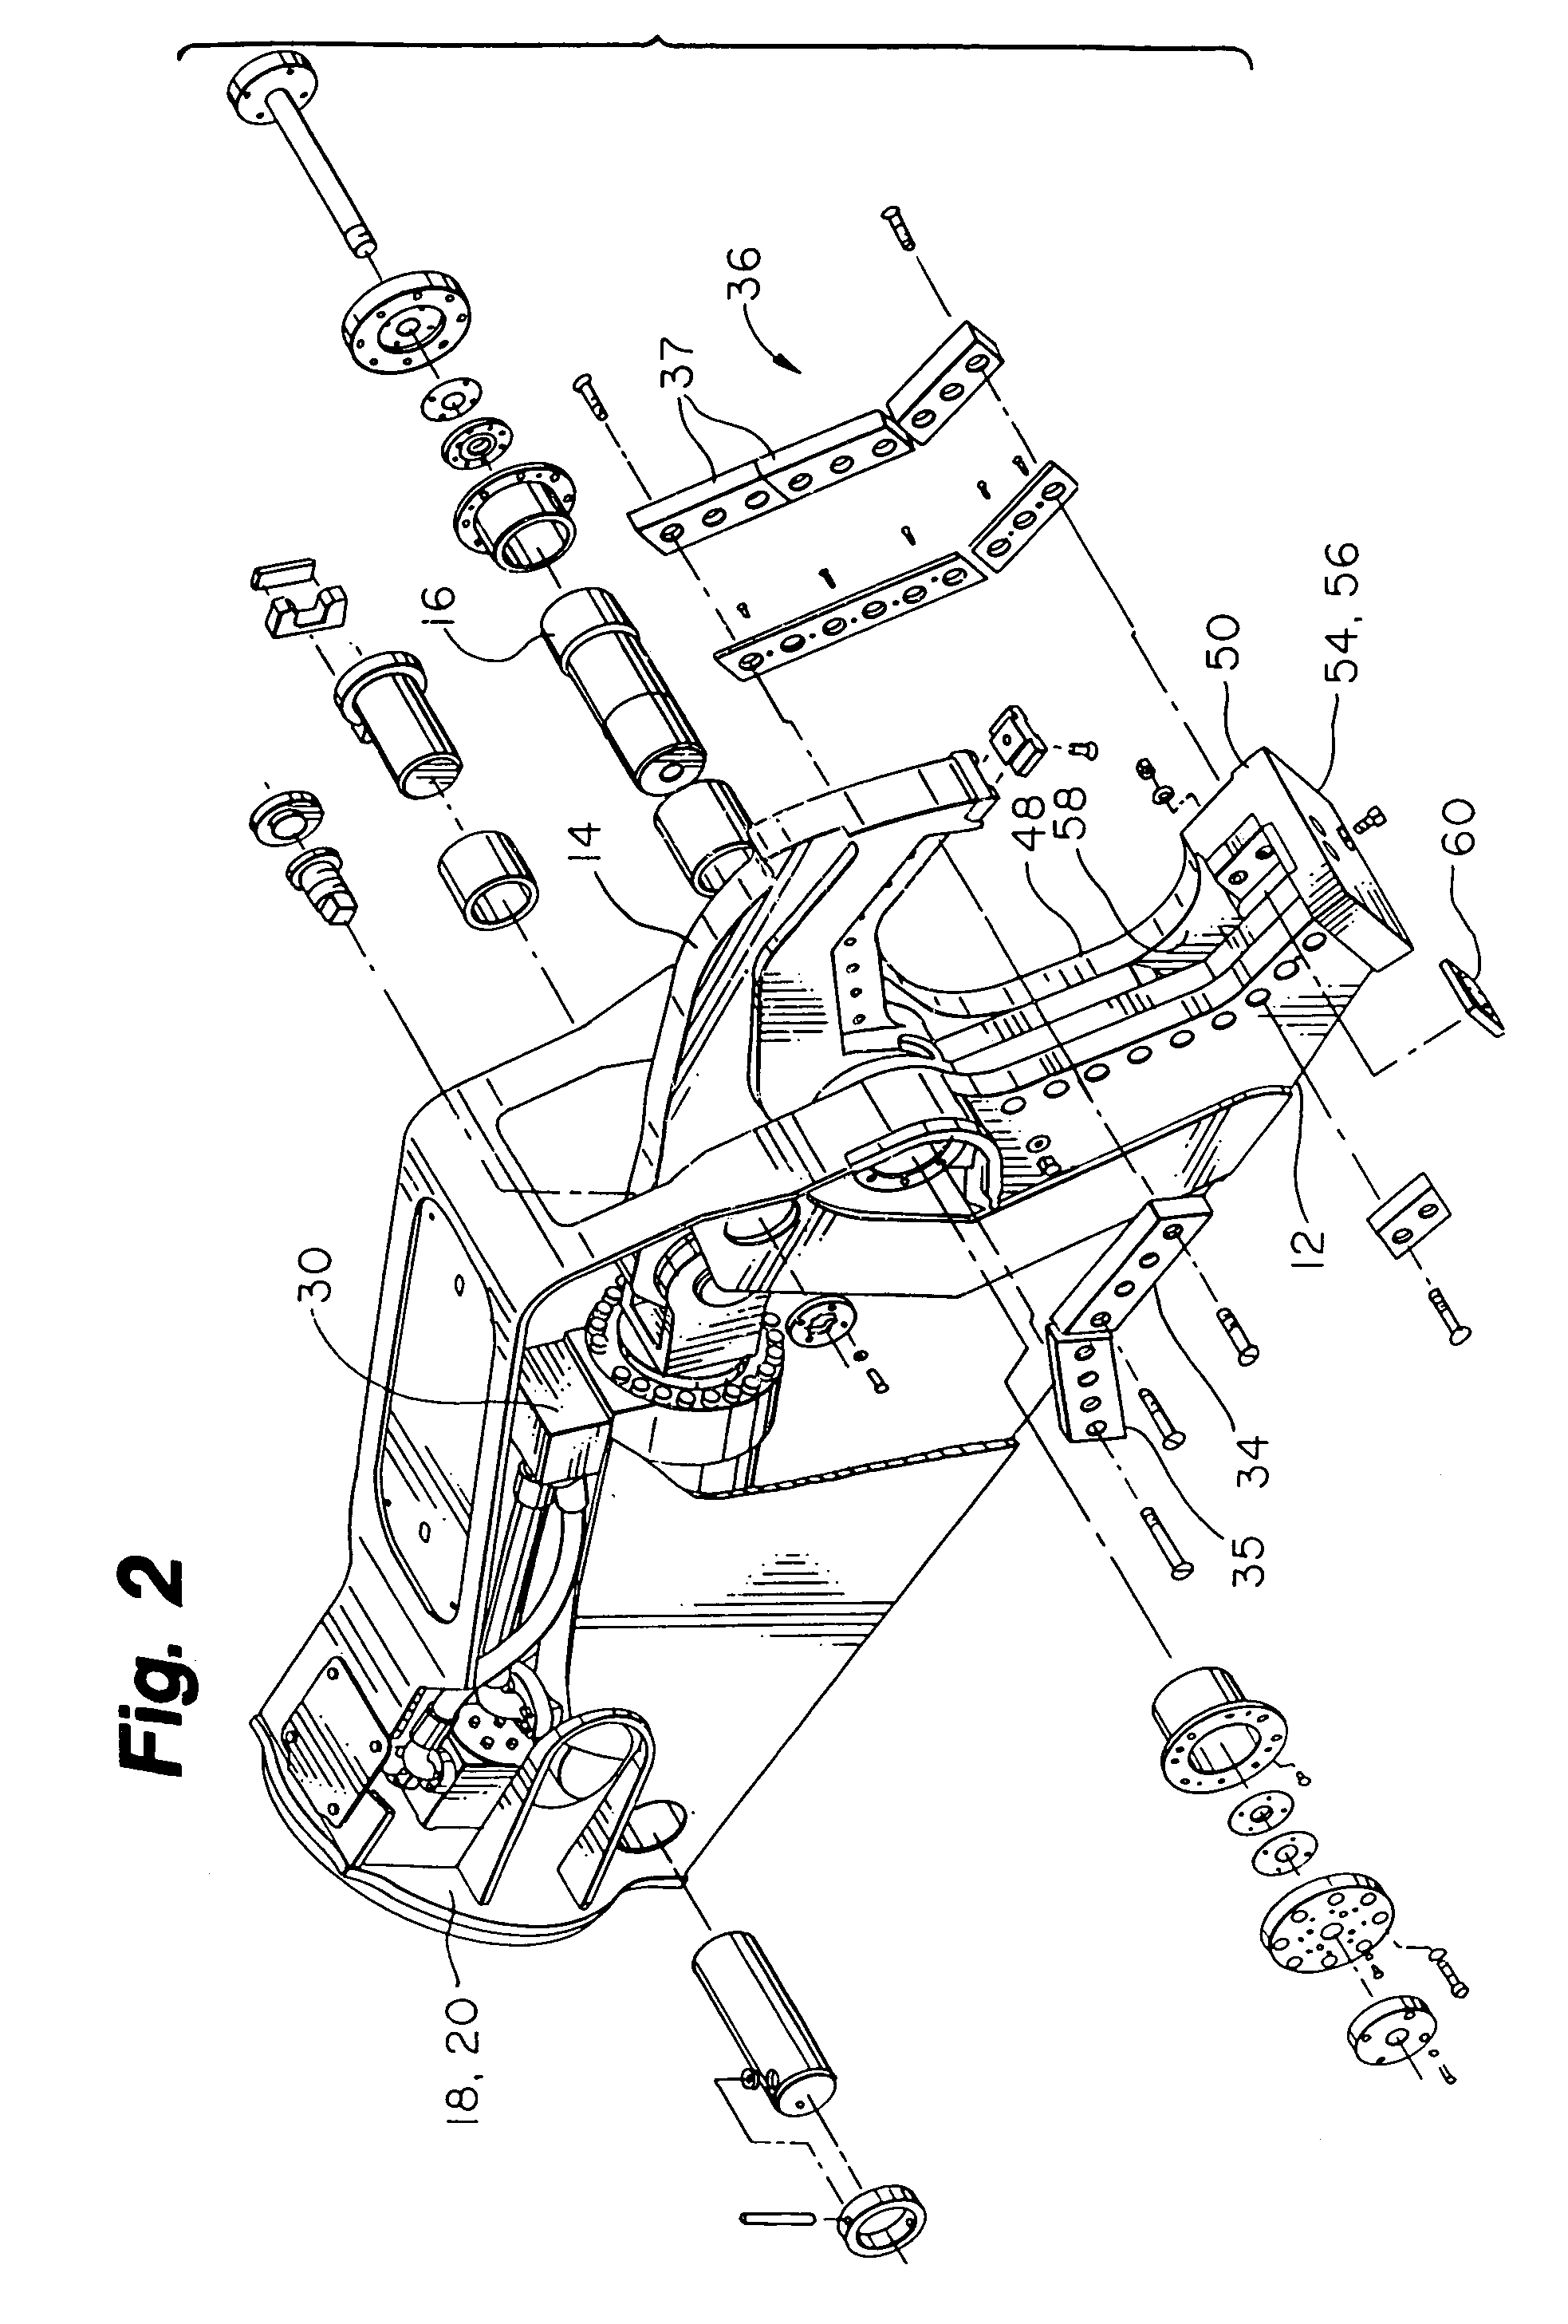 Heavy-duty demolition apparatus with replaceable tip and rotatable cross blade